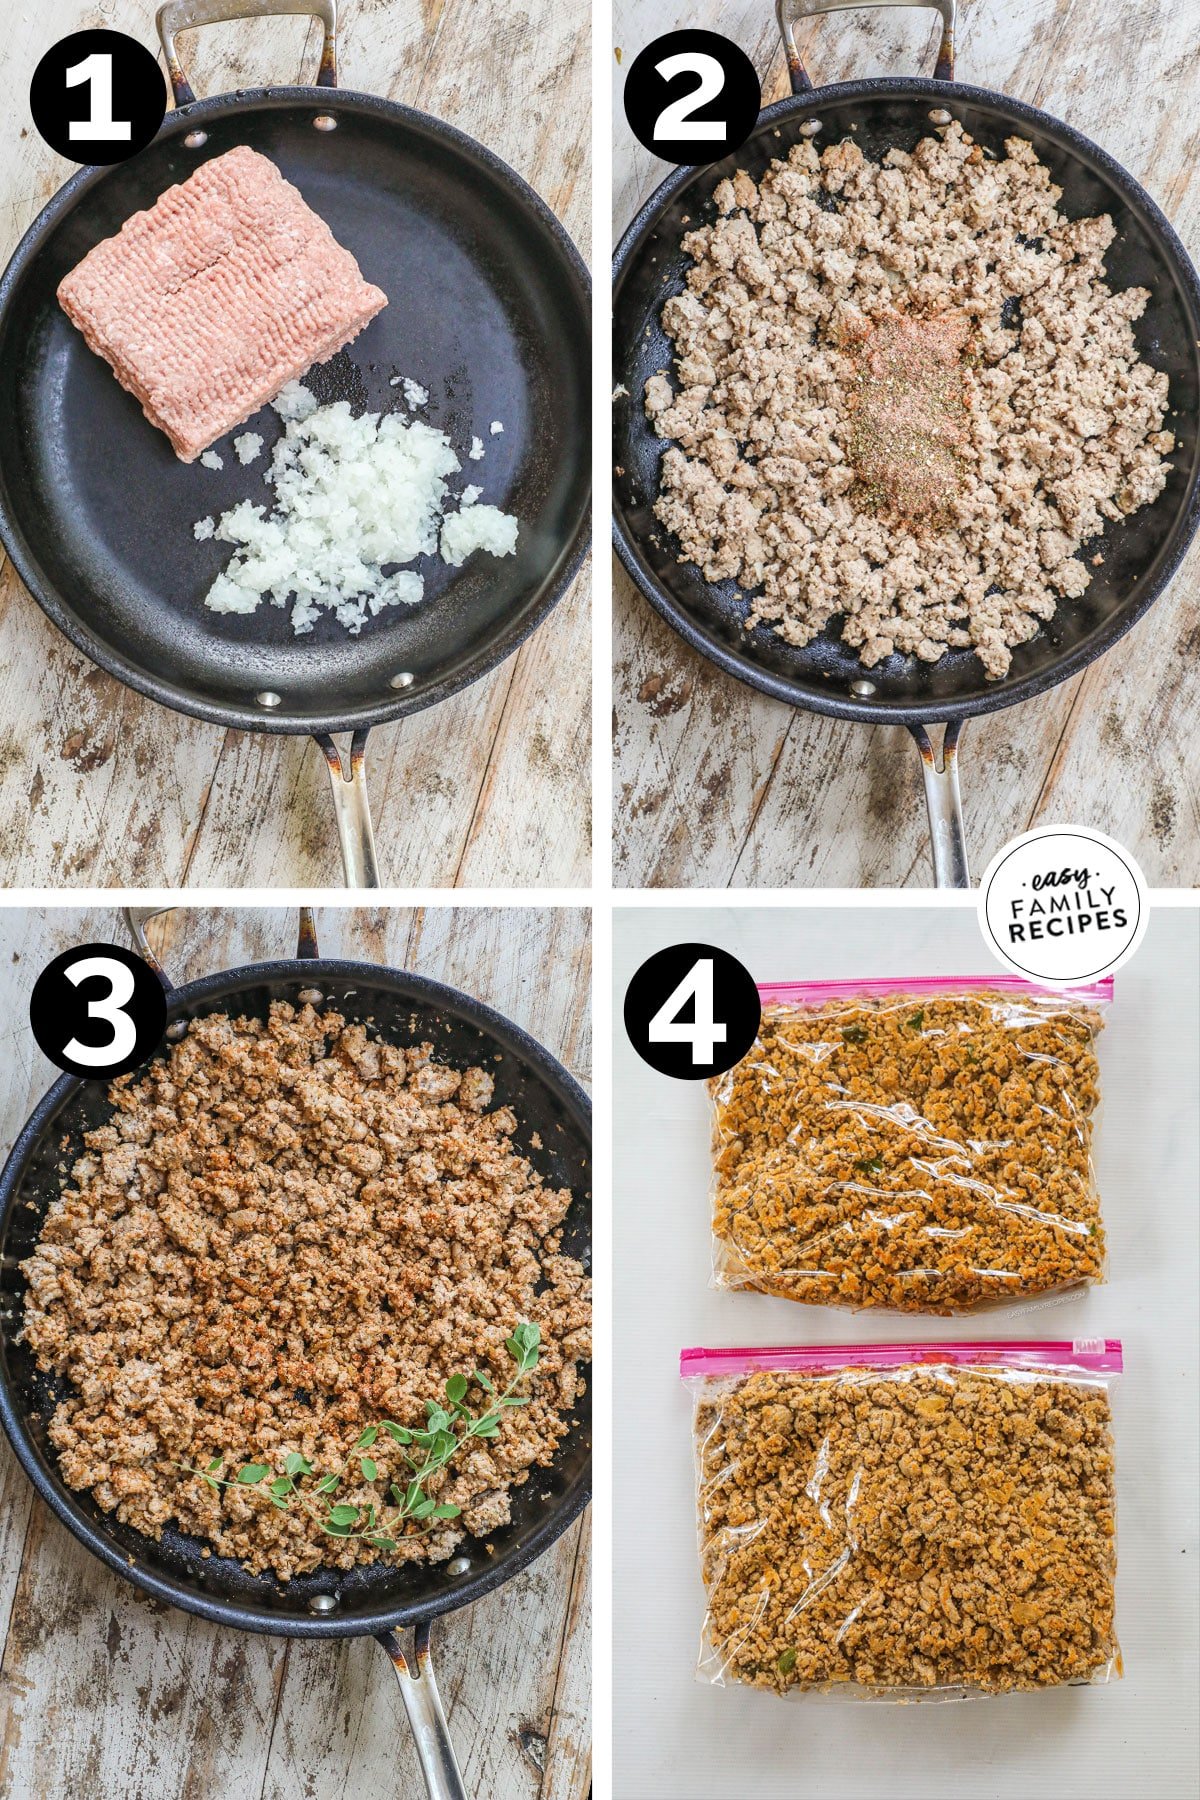 how to make seasoned ground turkey 1) add turkey and onion to a skillet, 2) cook, 3) add seasonings, 4) serve or store!